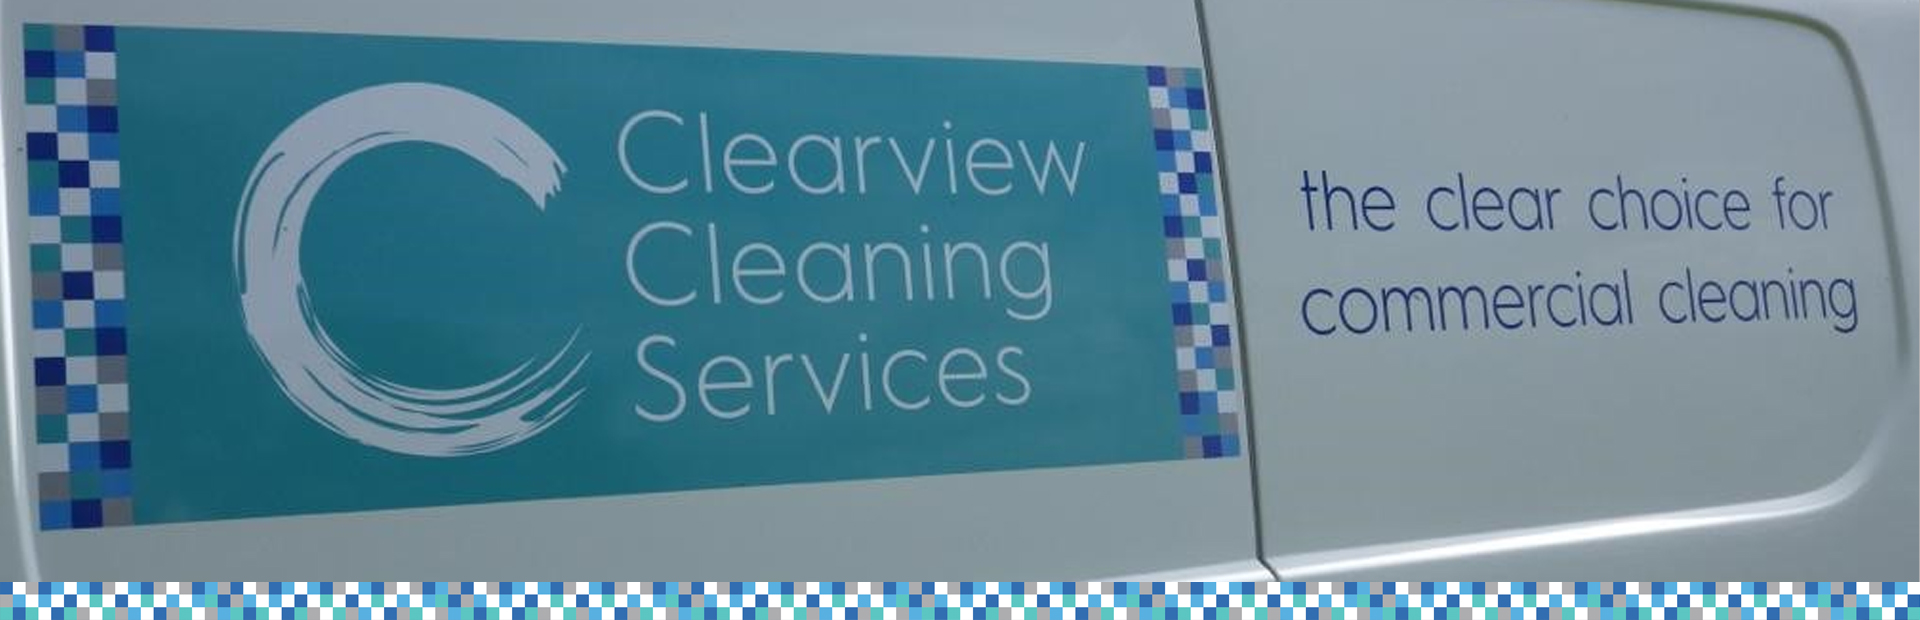 clearview dental indeed